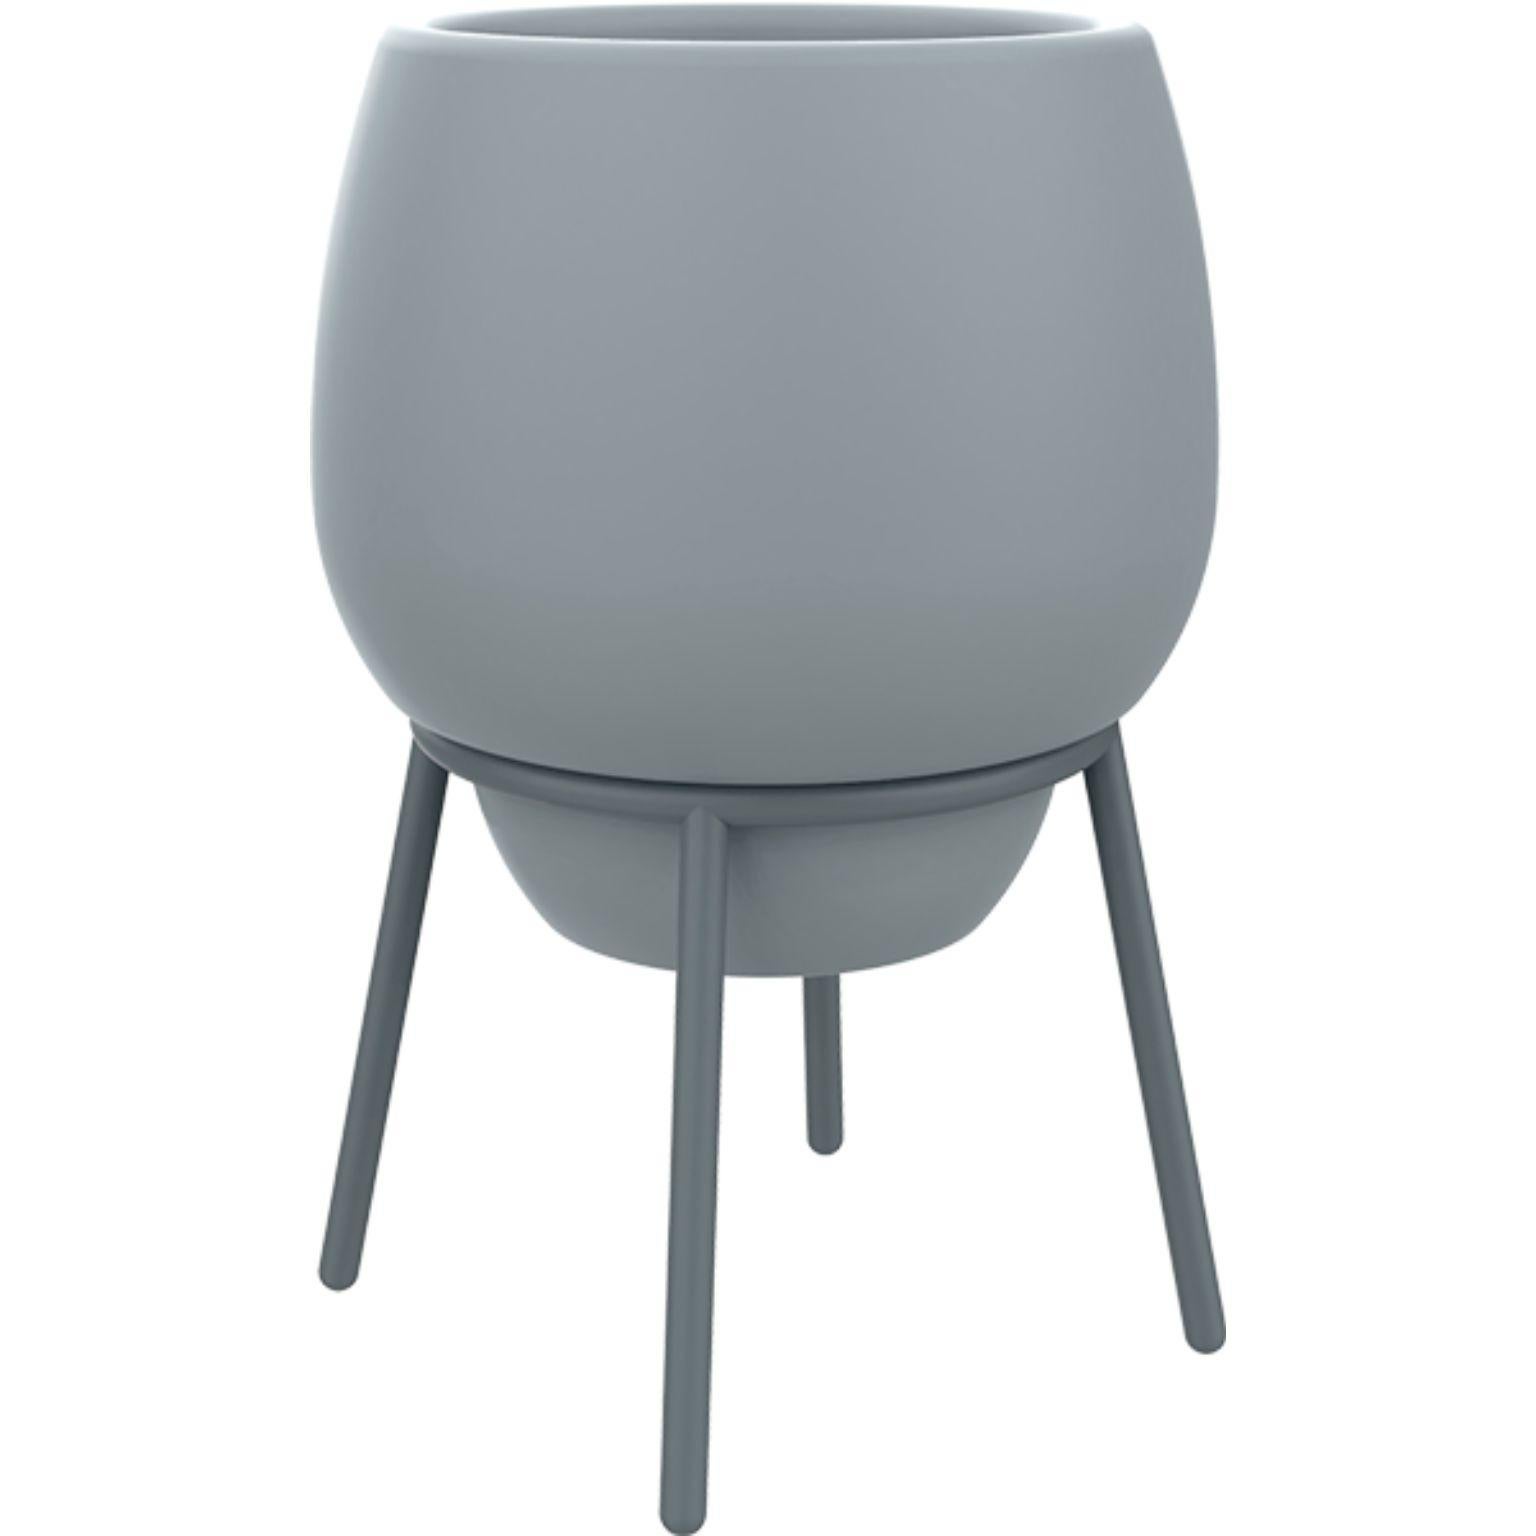 Lace Grey 50 low pot by Mowee
Dimensions: Ø 55 x H 76 cm.
Material: Polyethylene and stainless steel.
Weight: 6 kg.
Also available in different colors and finishes (Lacquered or retroilluminated).

Lace is a collection of furniture made by